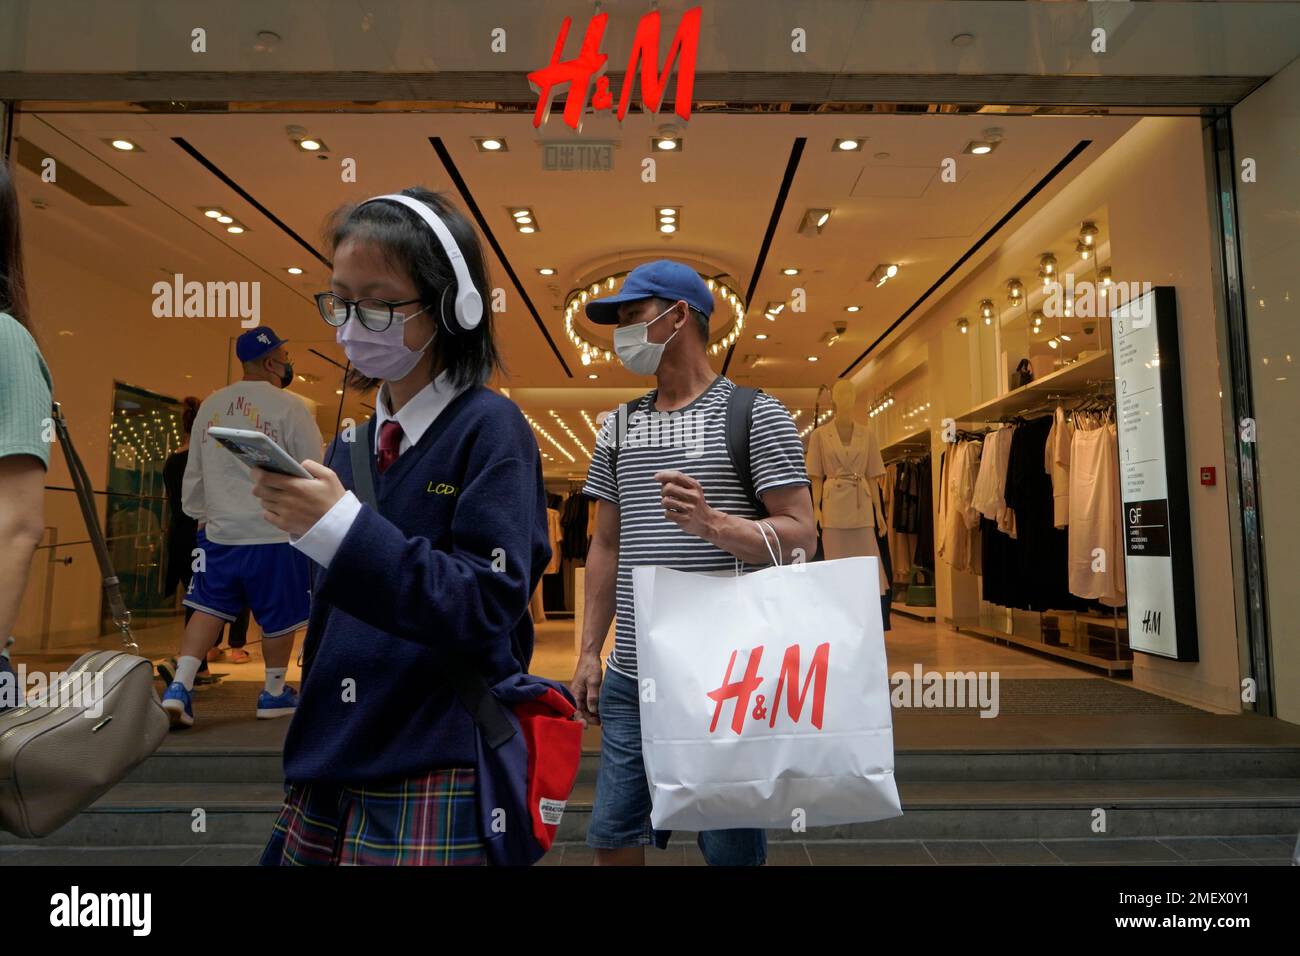 A man shops at an H&M clothing store in Hong Kong, Saturday, March 27,  2021. H&M disappeared from the internet in China as the government raised  pressure on shoe and clothing brands